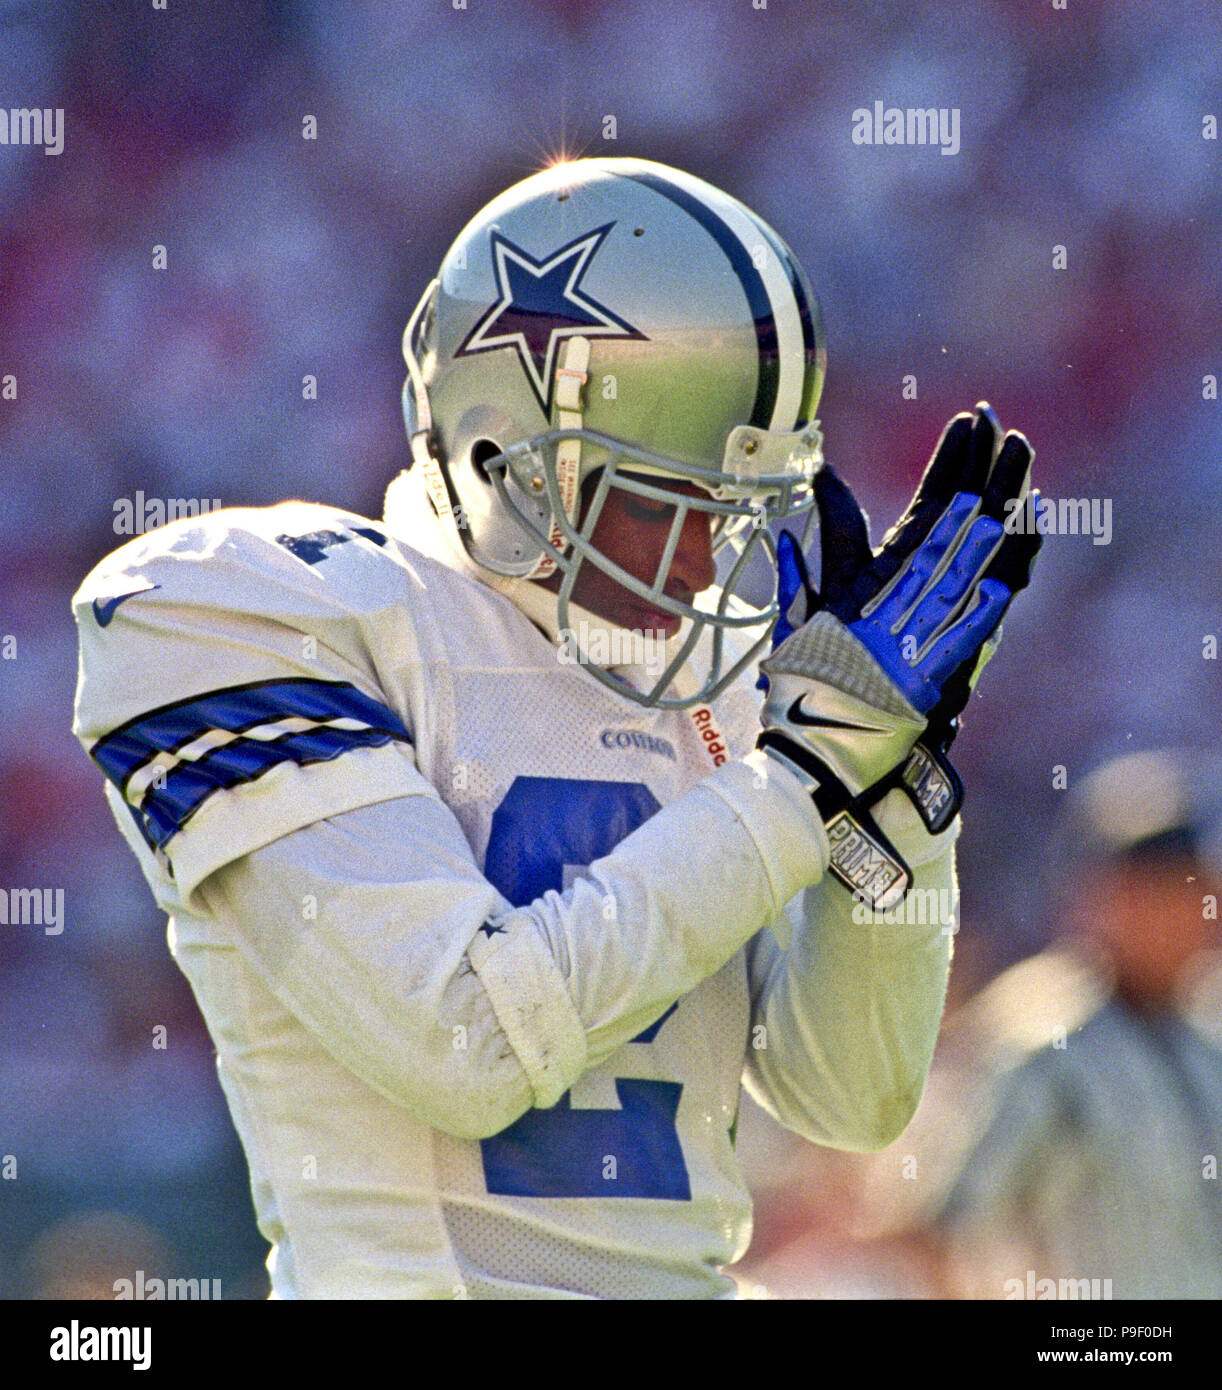 505 Deion Sanders Cowboys Stock Photos HighRes Pictures and Images   Getty Images